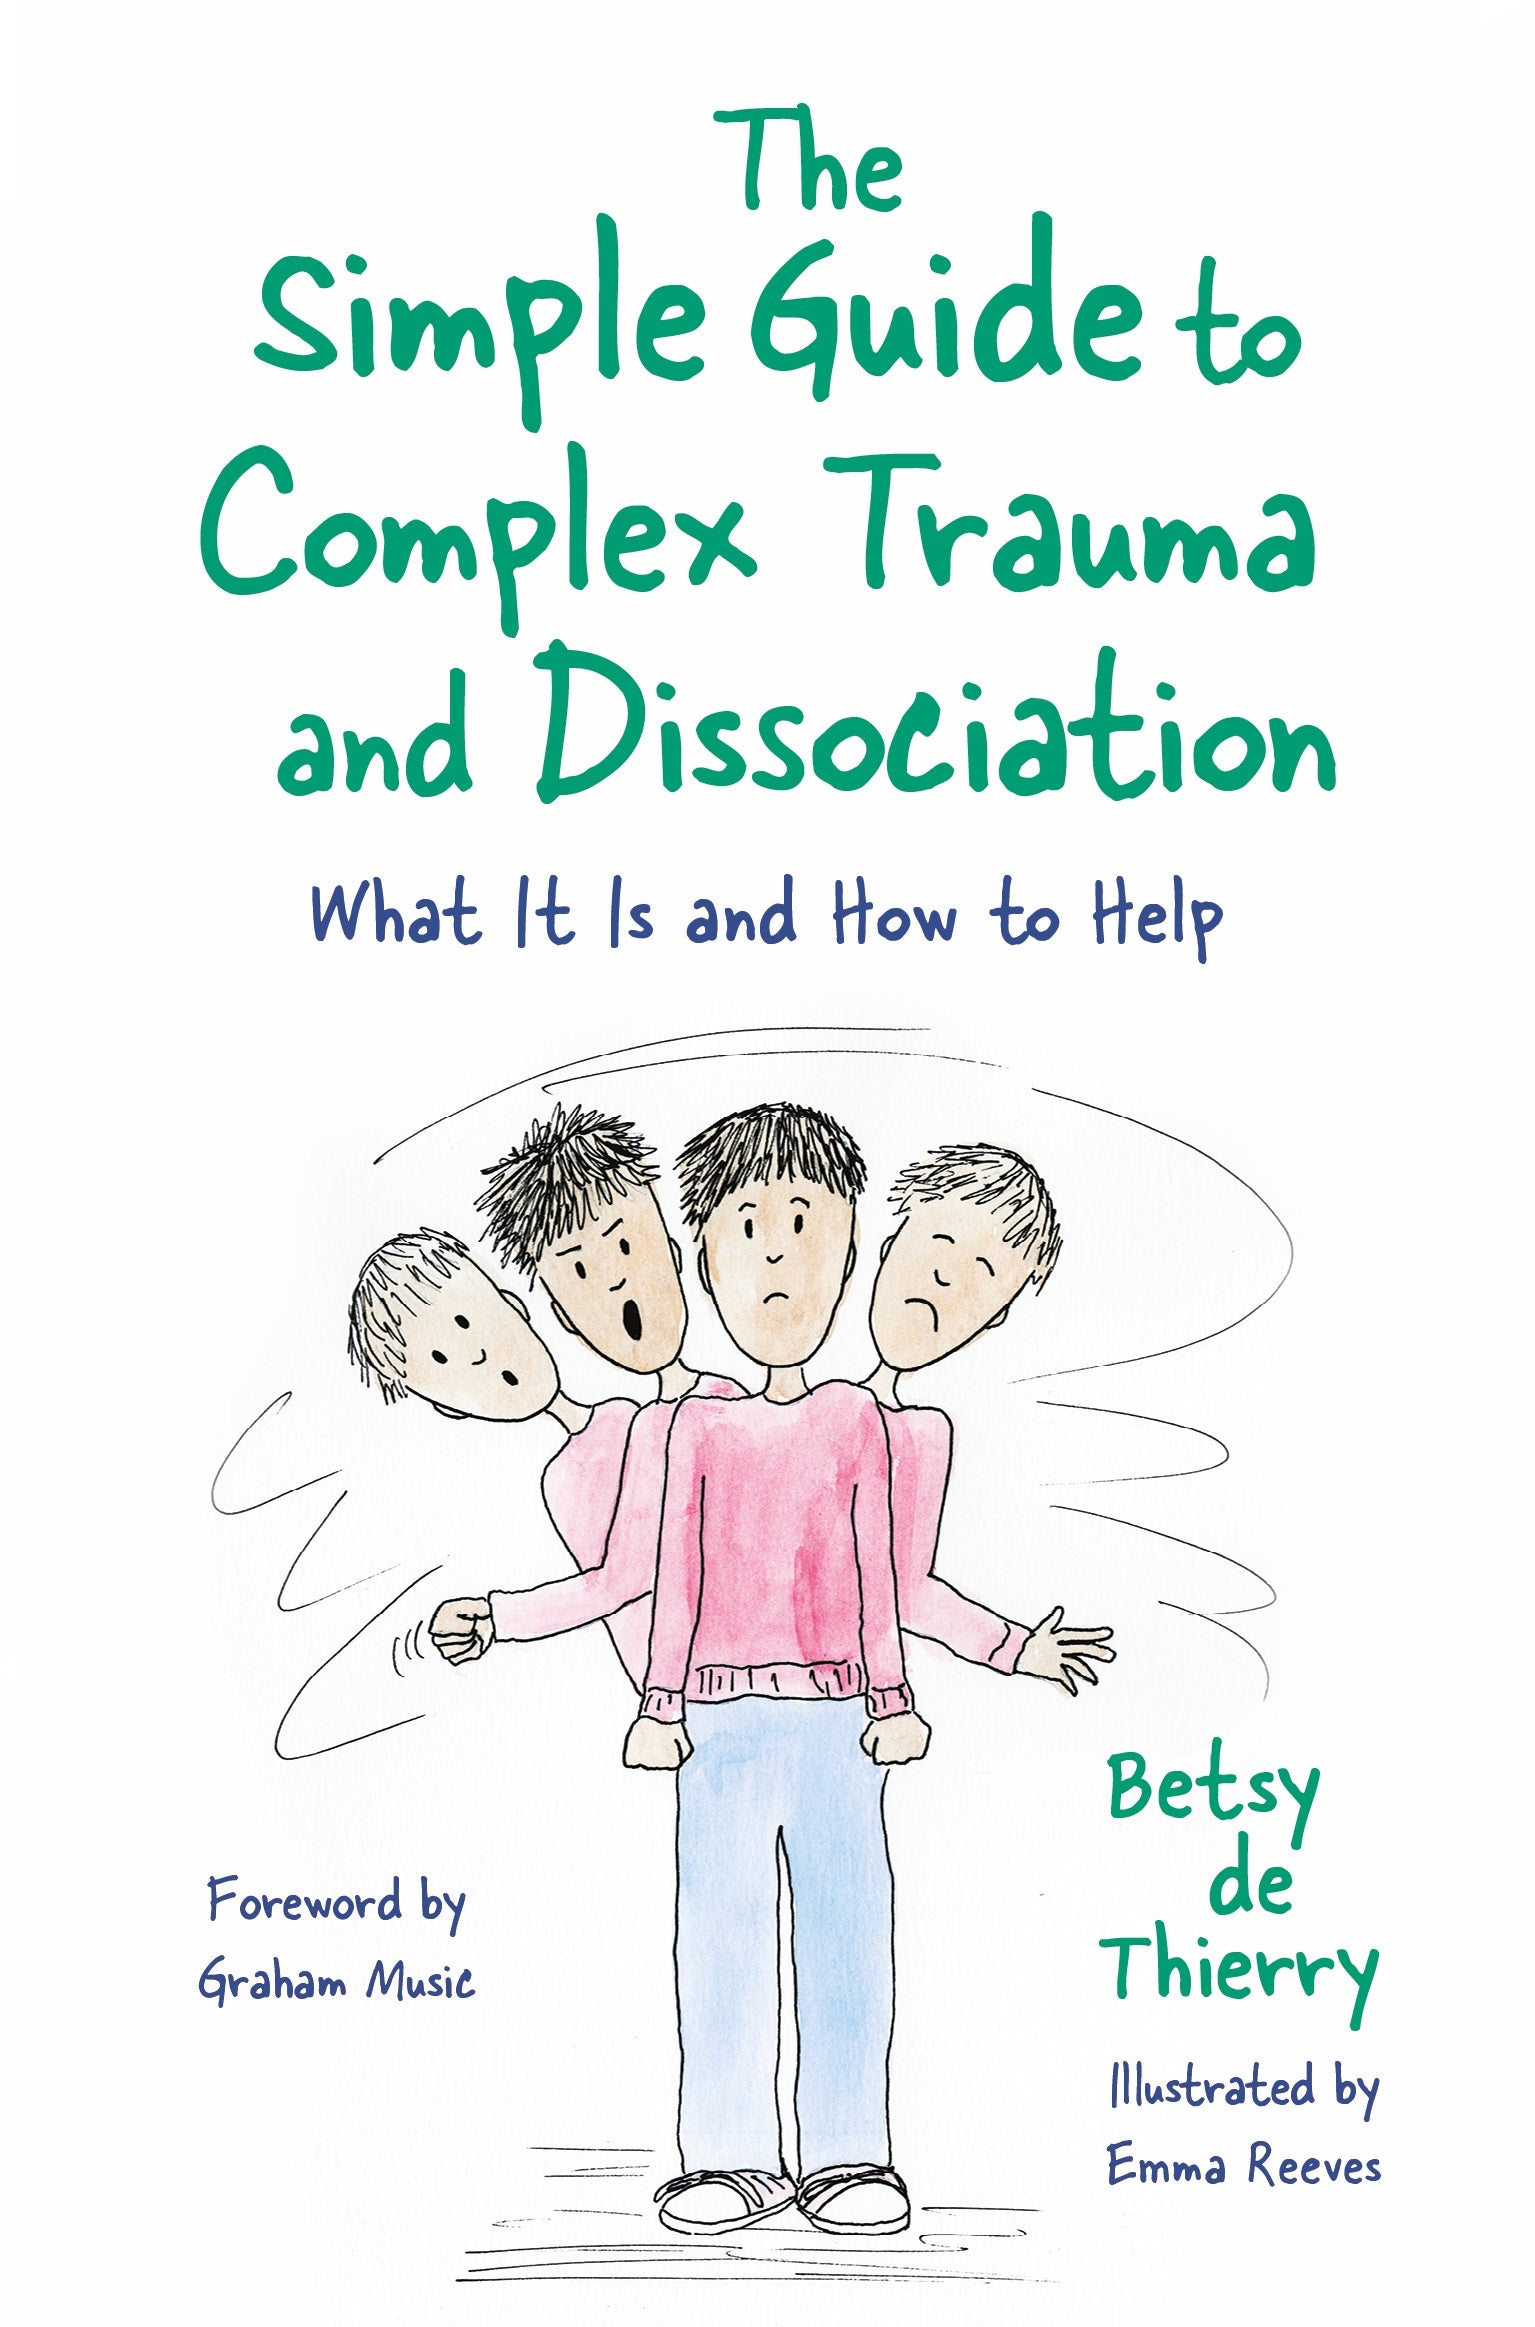 The Simple Guide to Complex Trauma and Dissociation by Graham Music, Emma Reeves, Betsy de Thierry